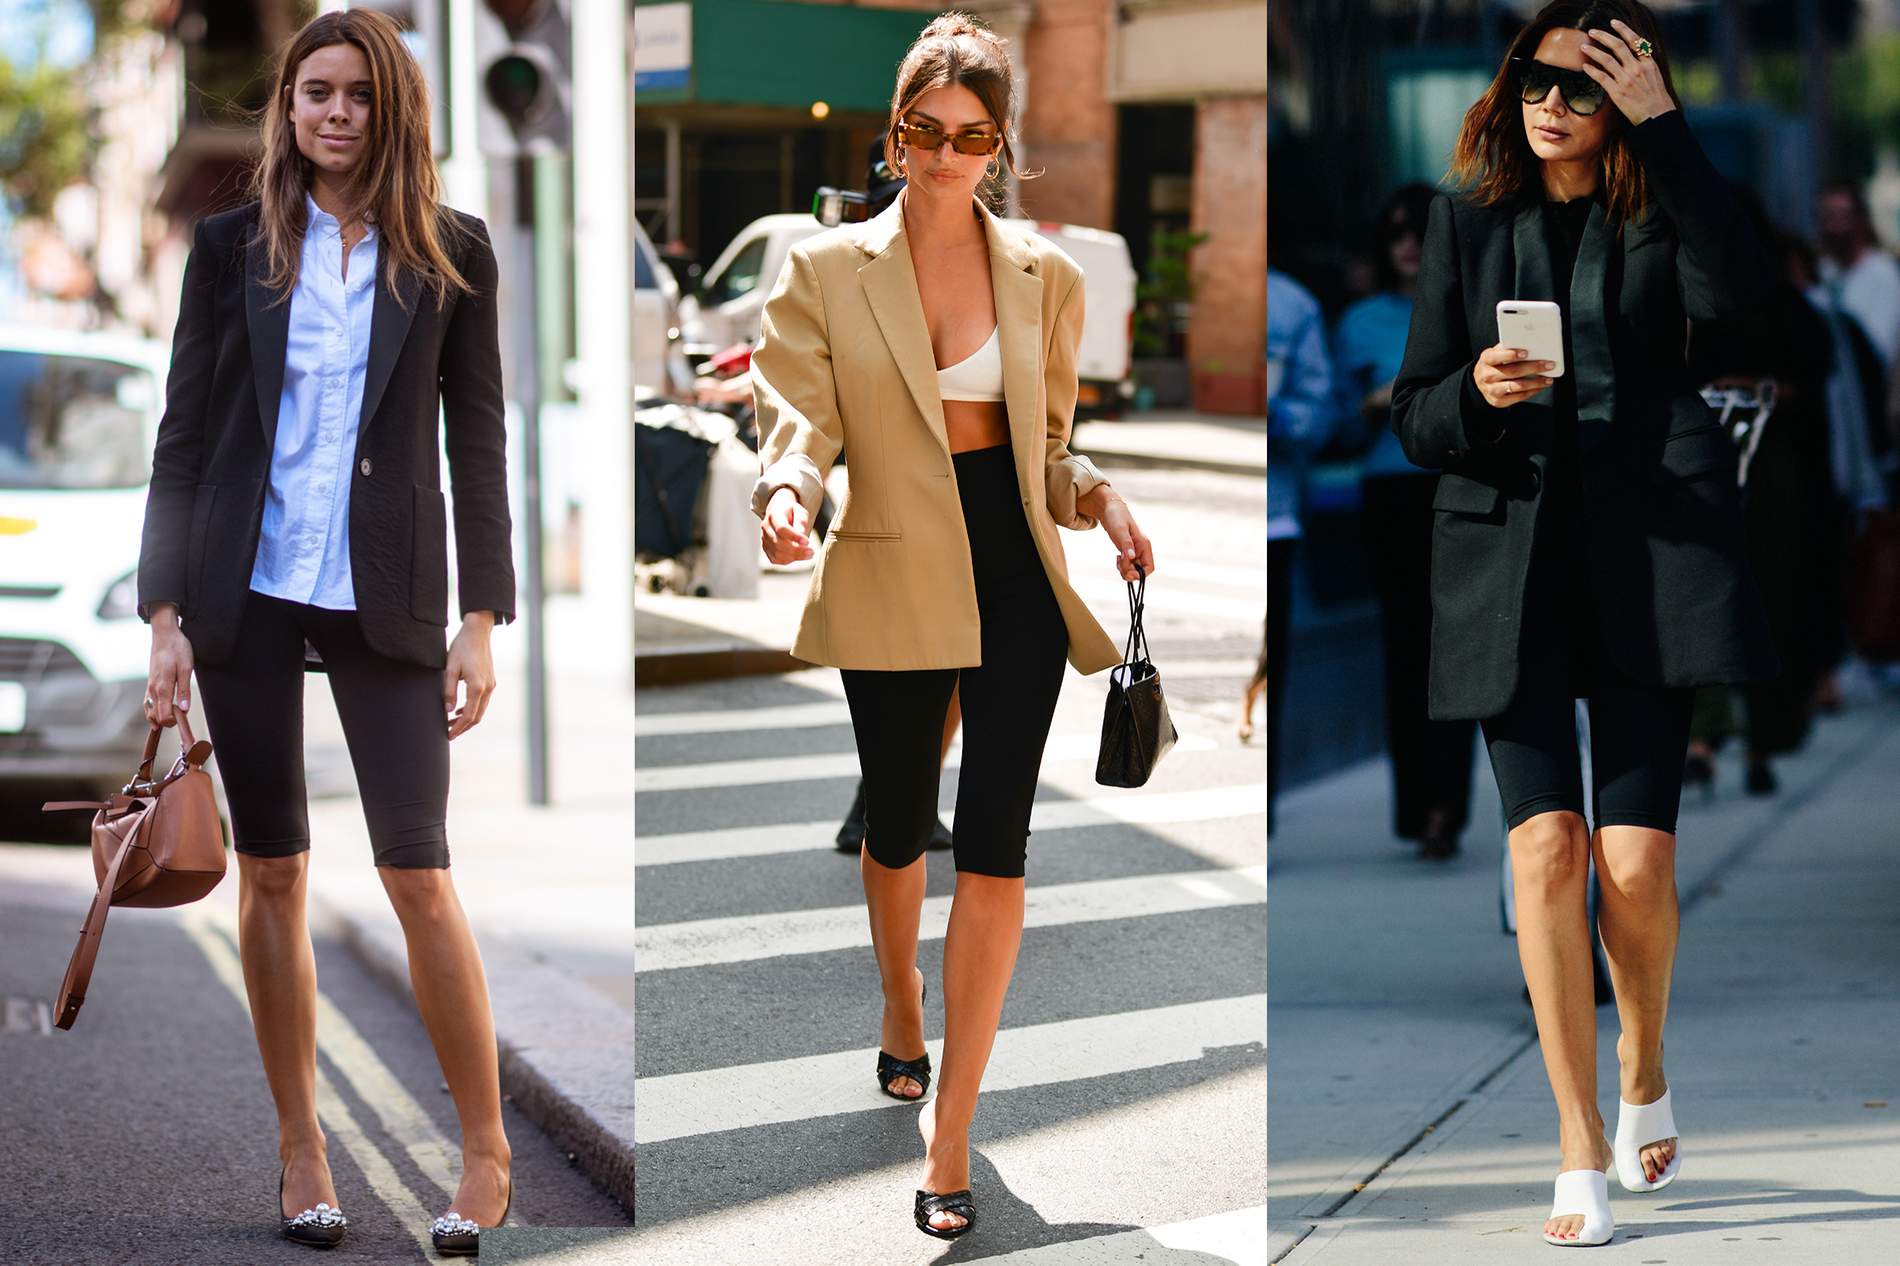 bad fashion trends - Bike shorts with heels and a blazer